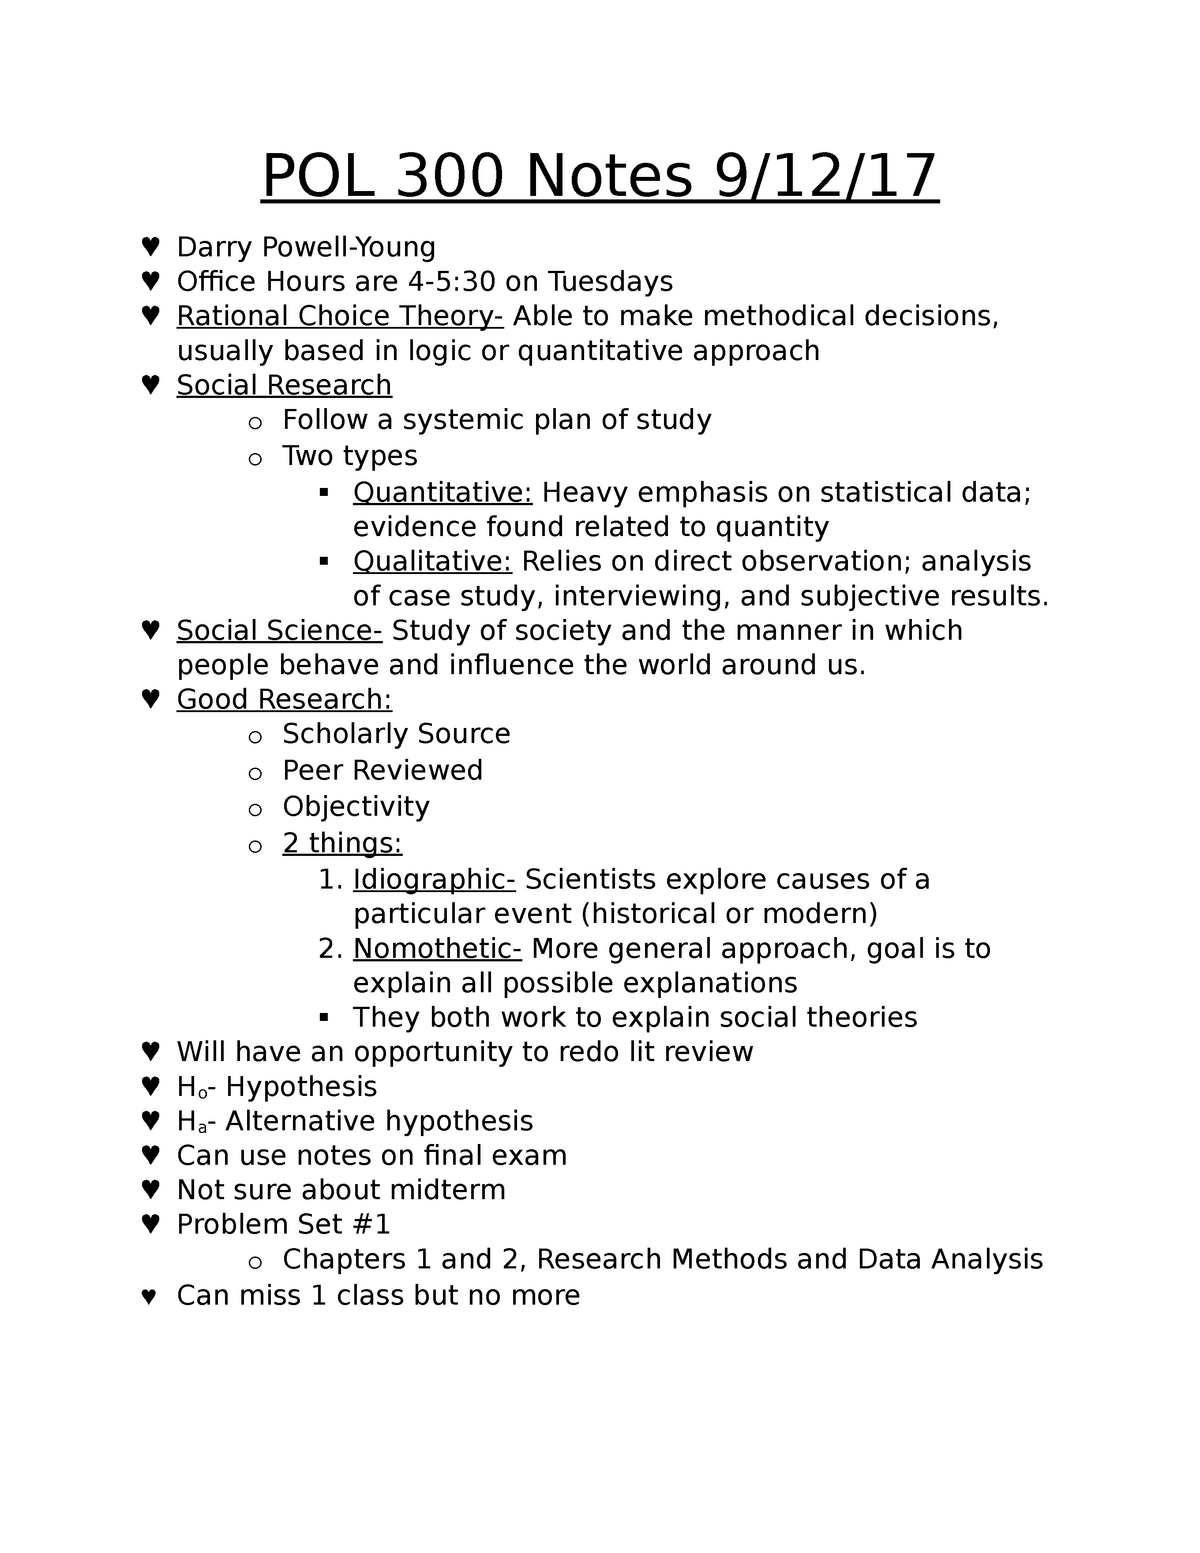 Pol 300 Lecture Notes Warning Tt More Functions Defined Than Expected Pol 300 Notes 912 8372